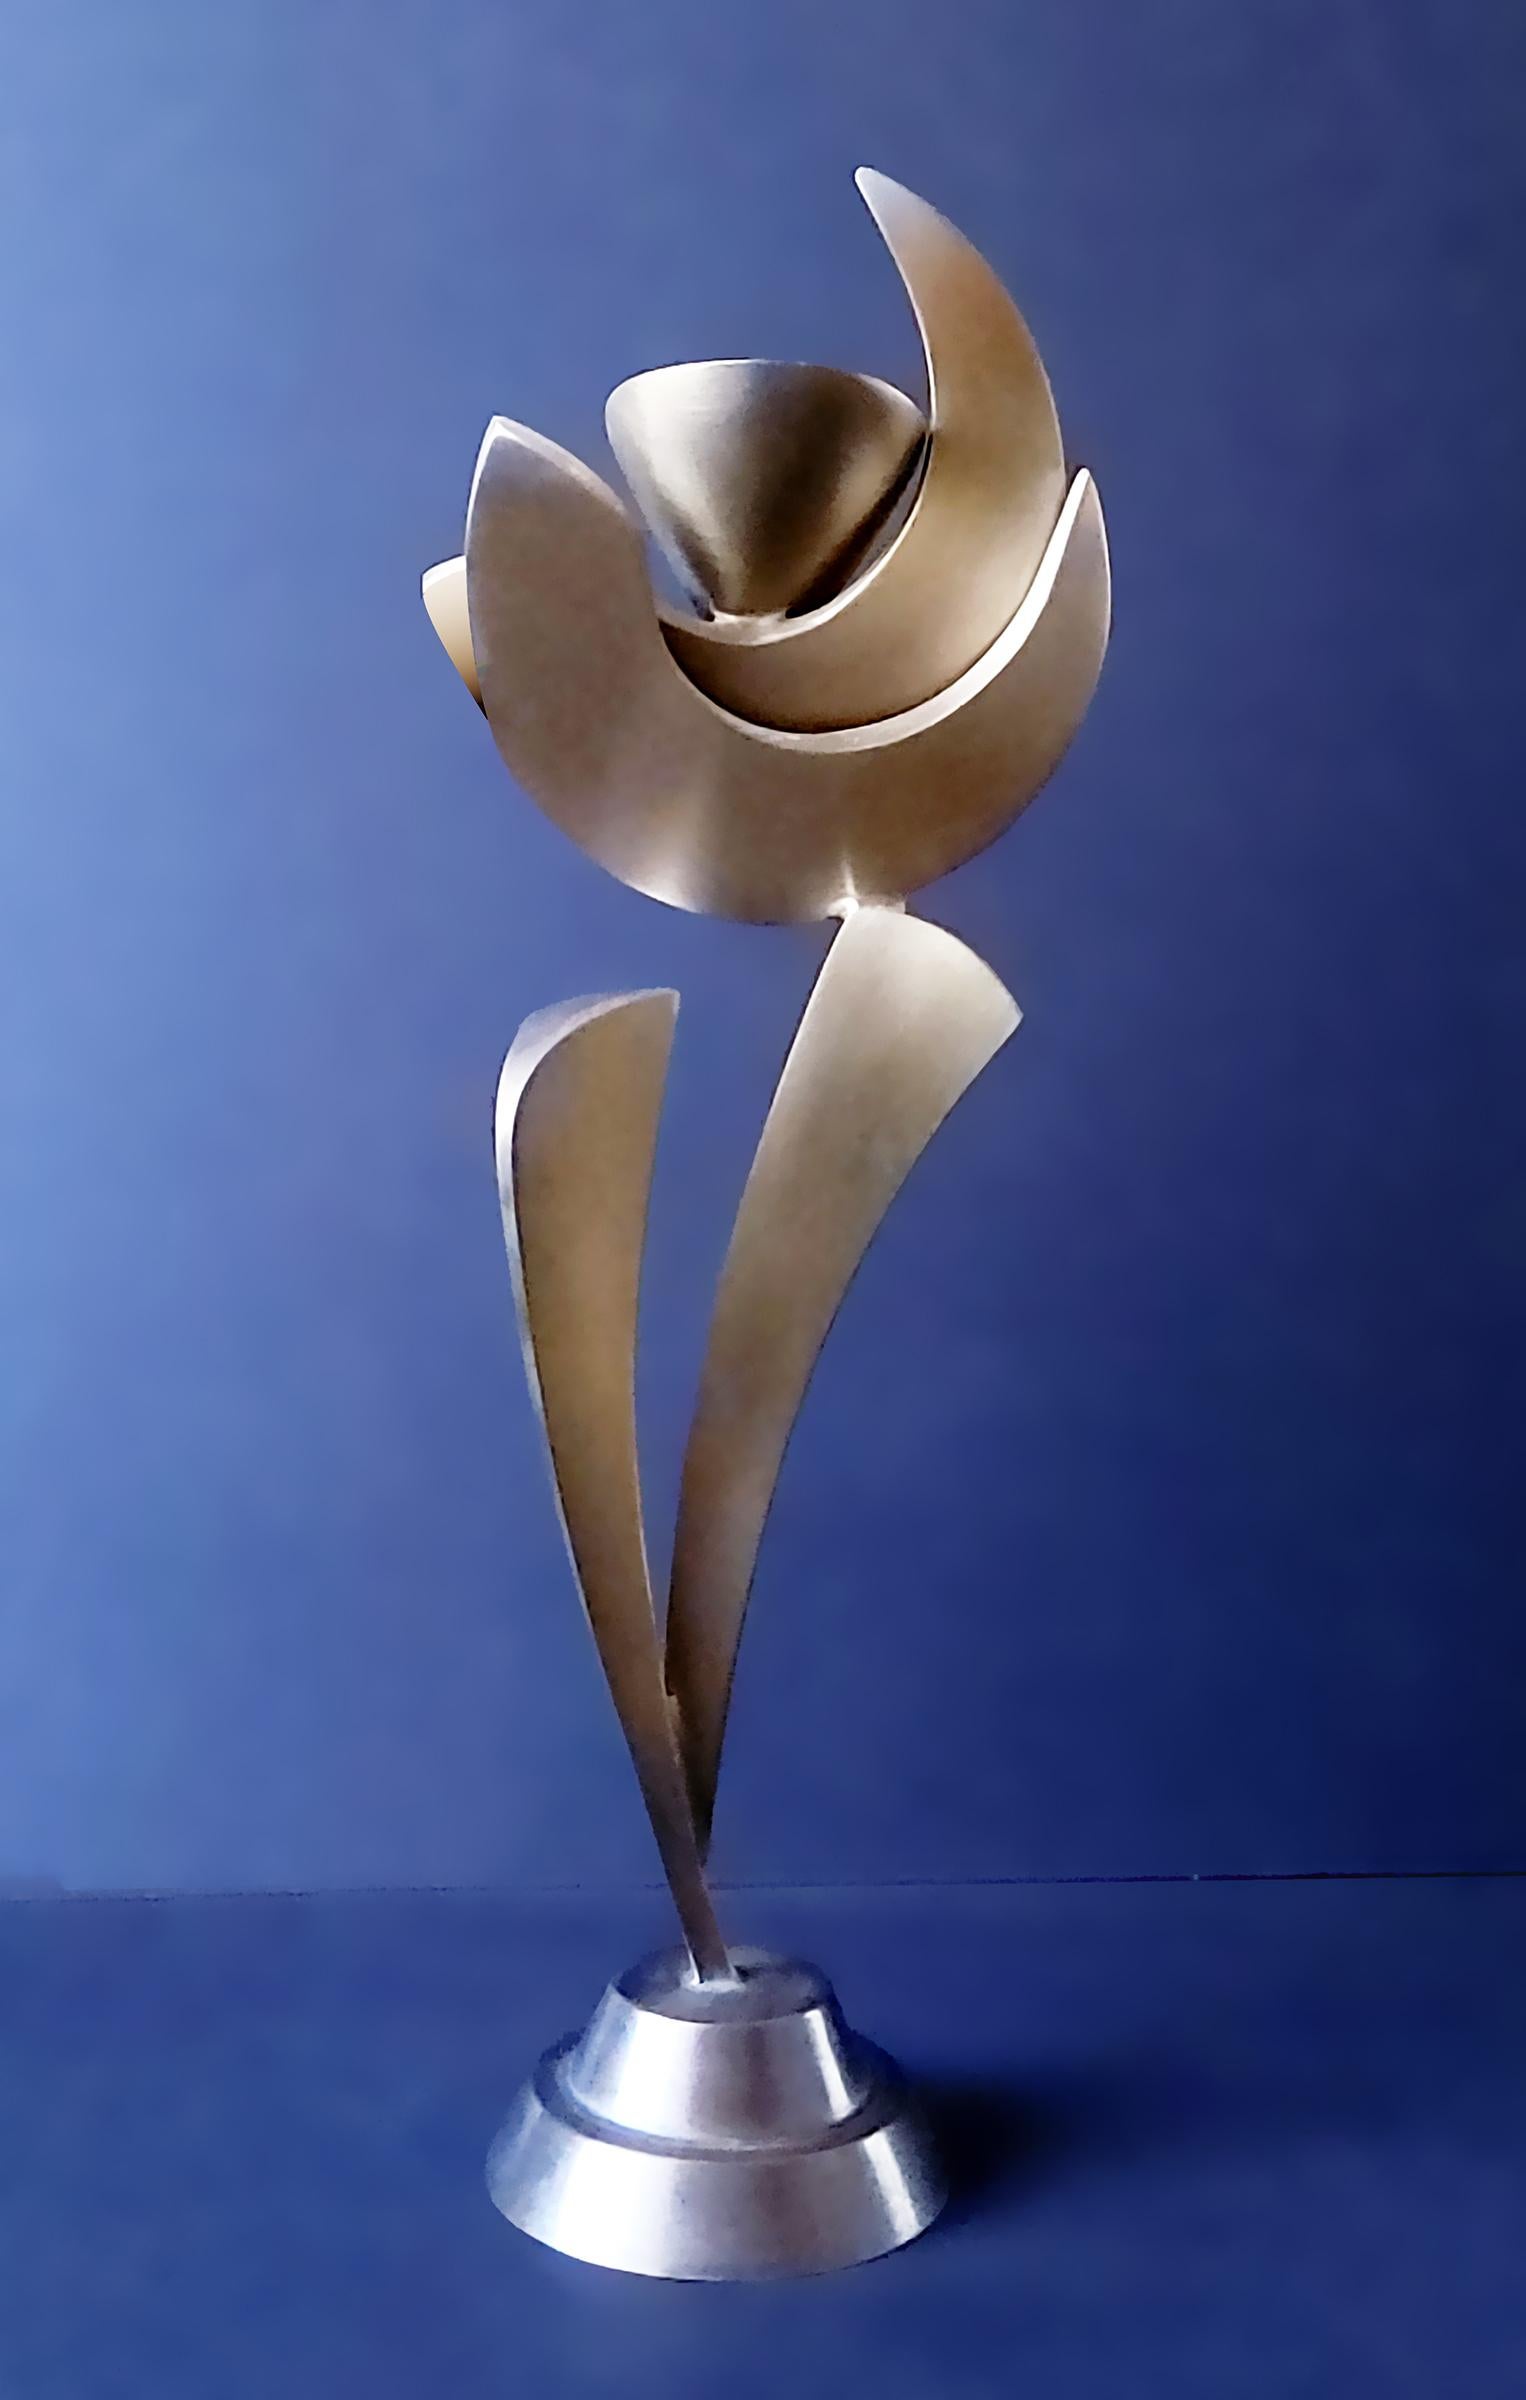 ORACLE 4 - Abstract Sculpture by Lyle London